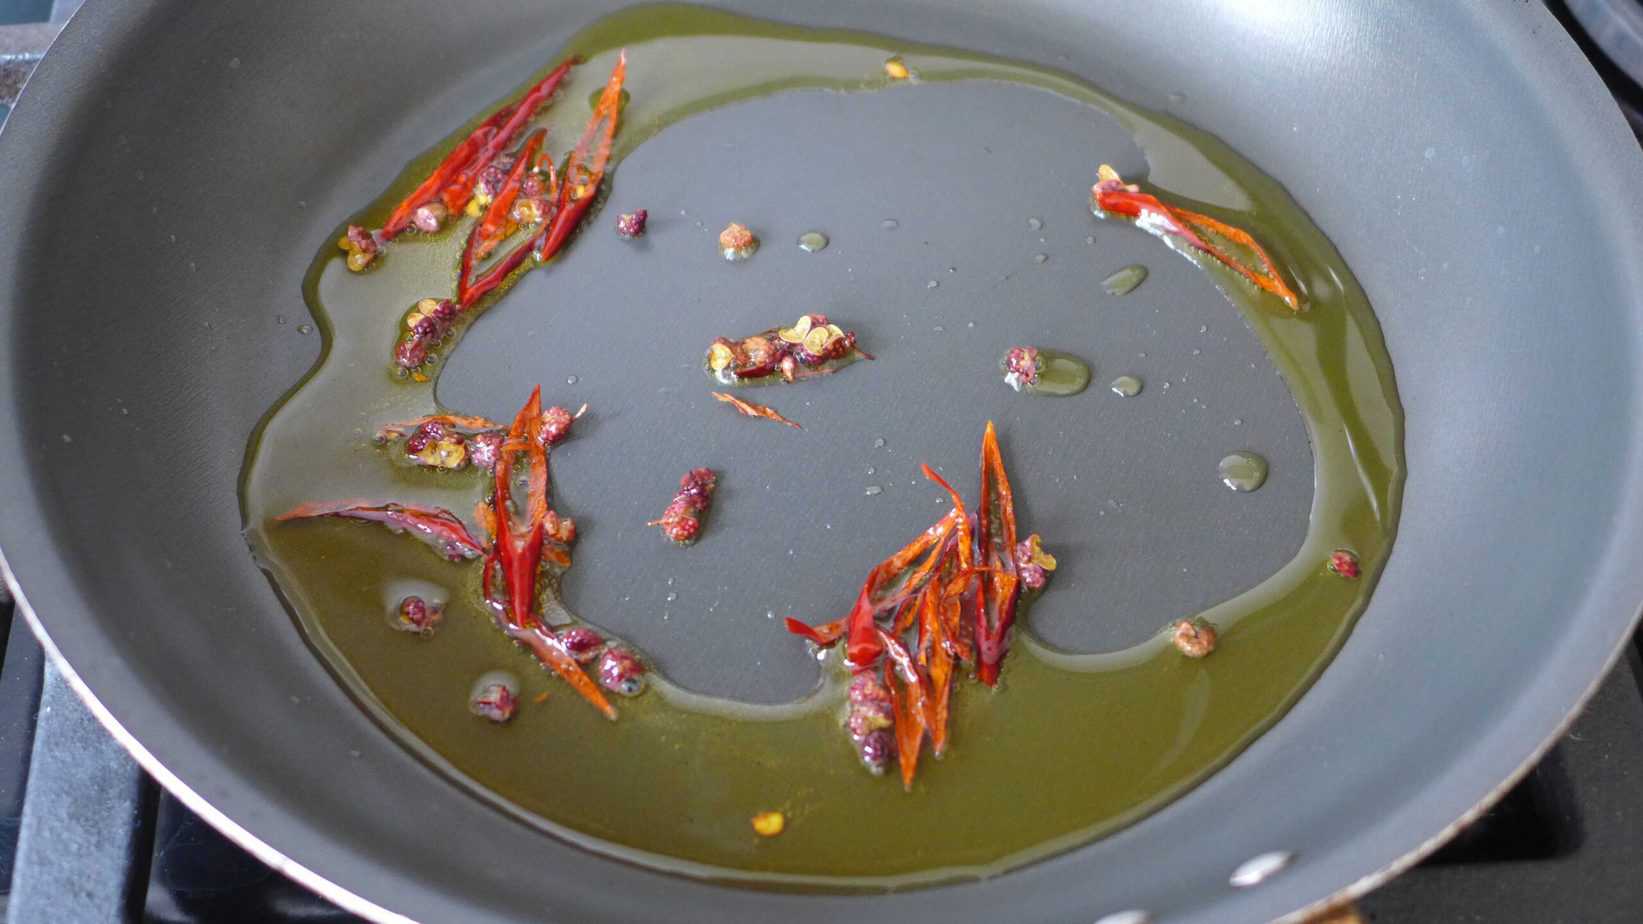 cooking dried chili and Sichuan pepper in oil